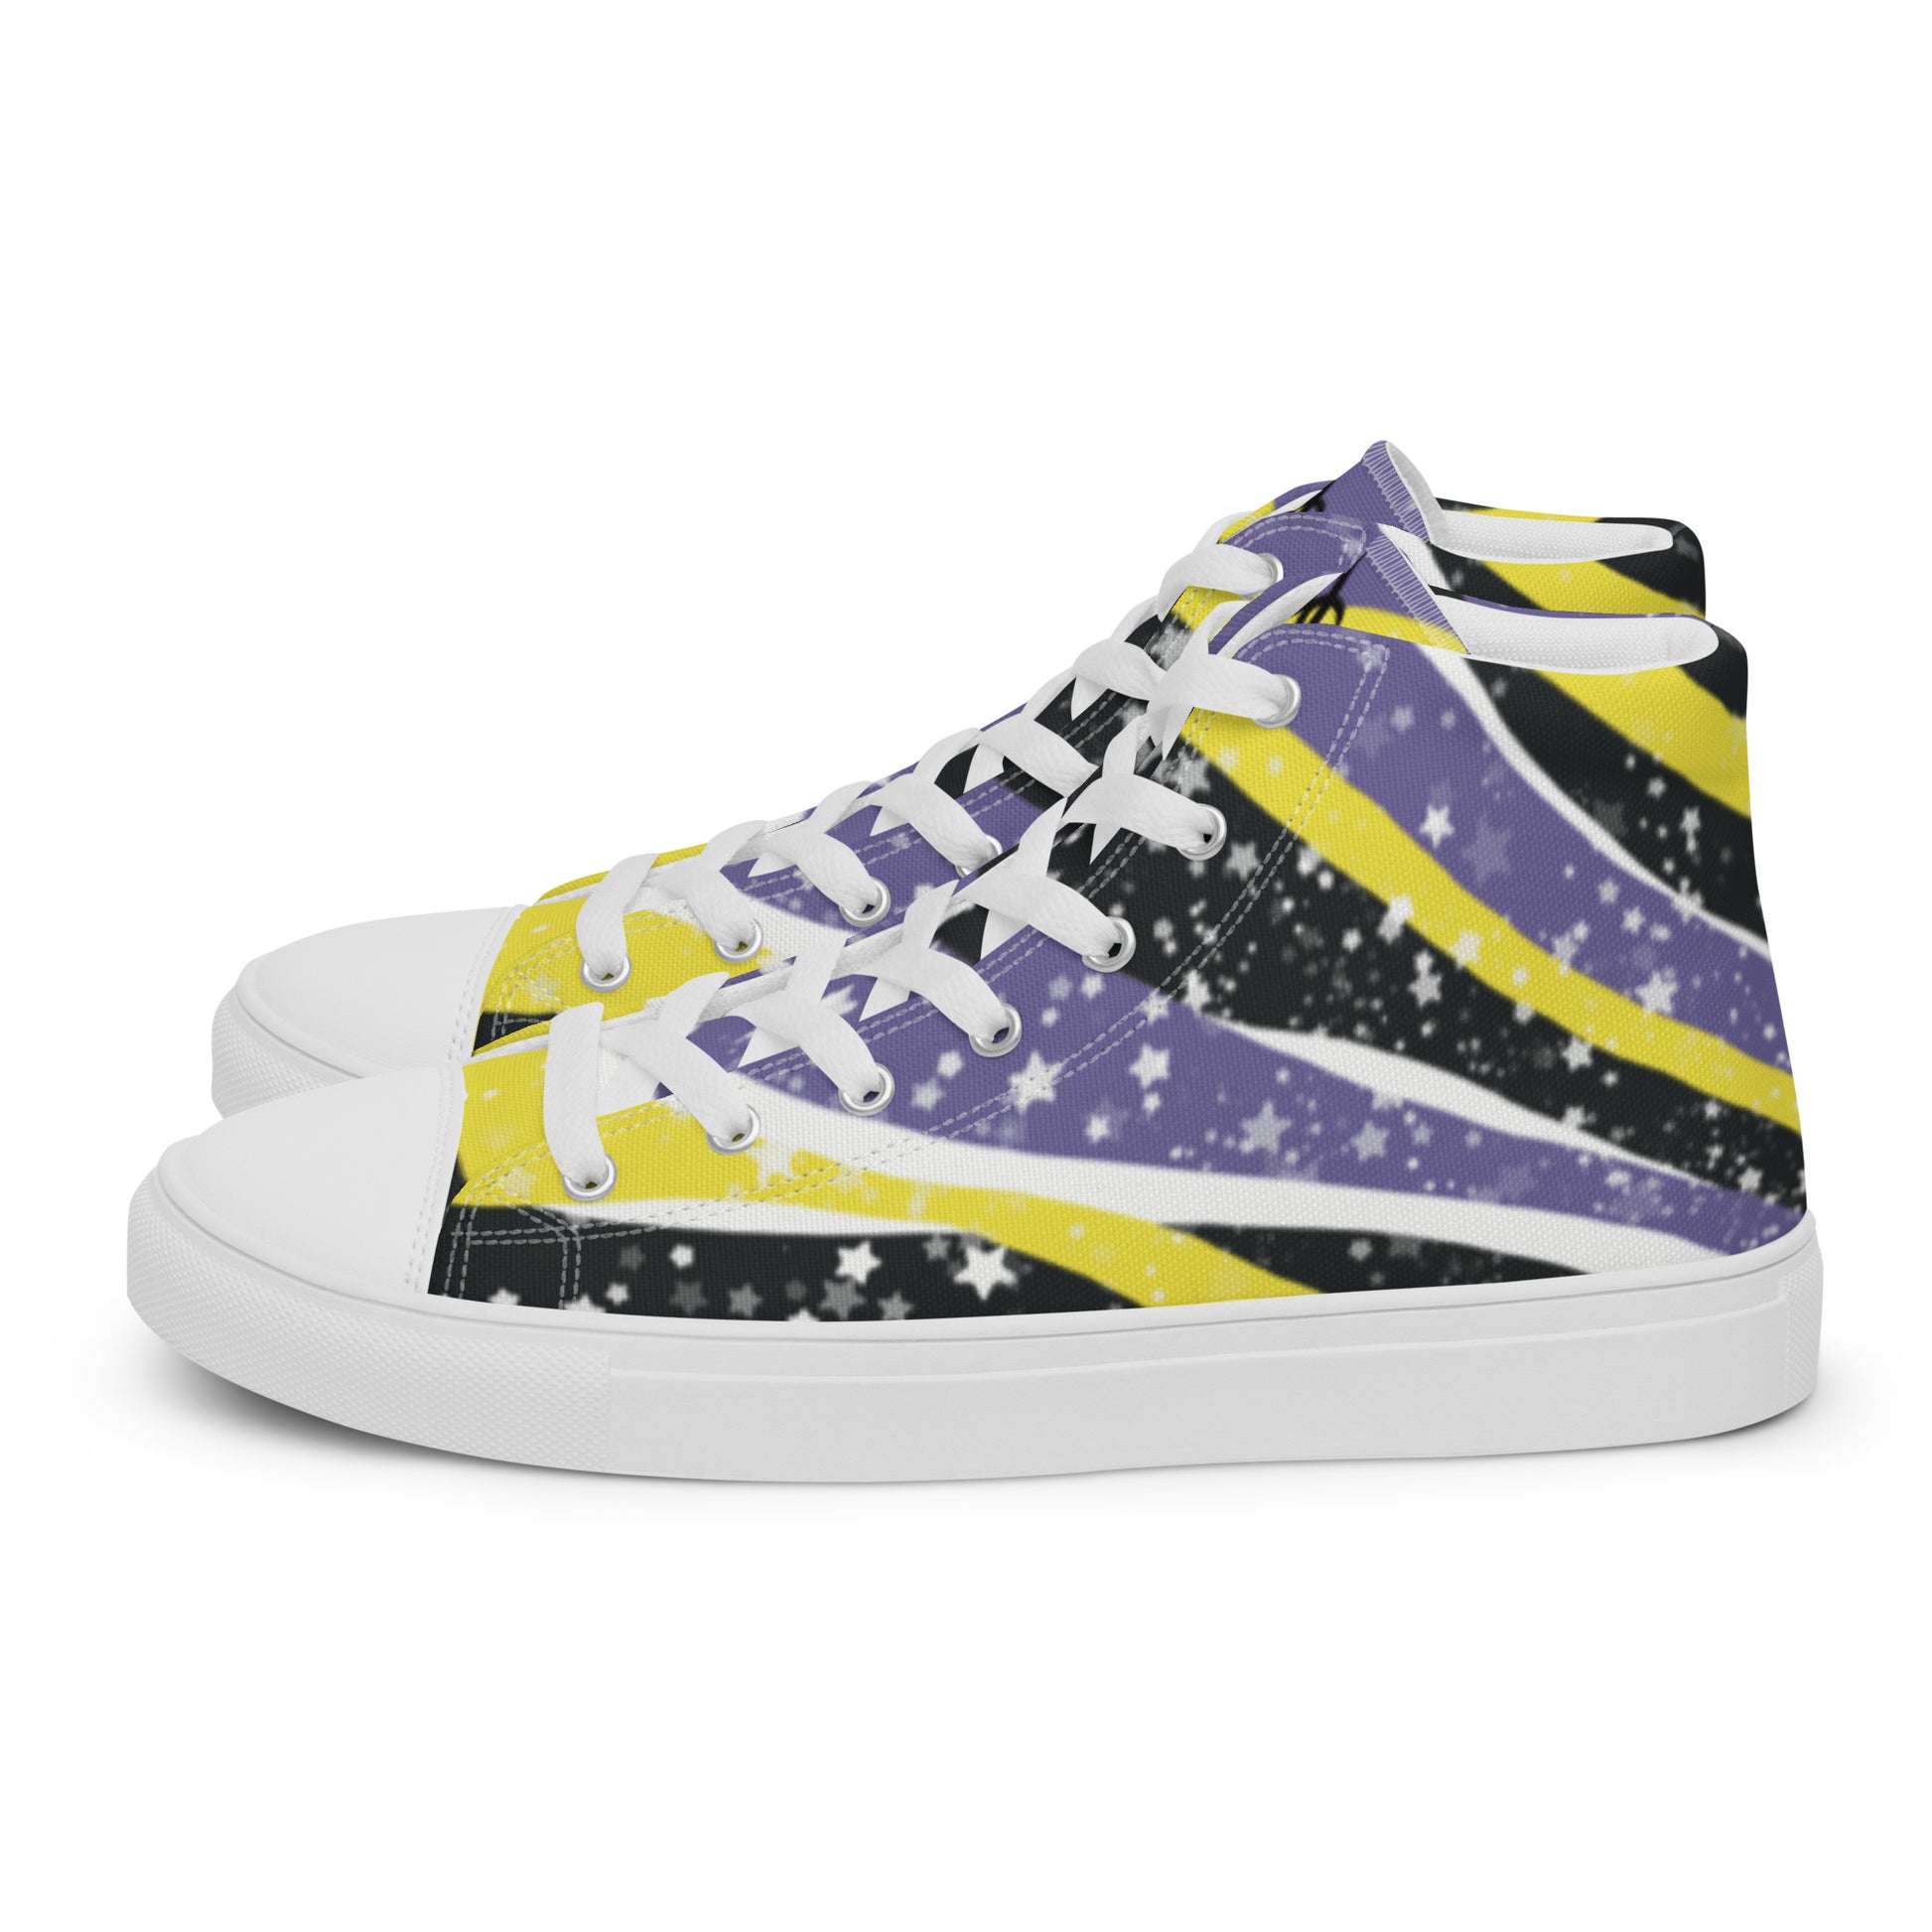 Left view: a pair of high-top shoes with ribbons of the yellow, purple, and black of the non-binary pride flag coming from the heel and expanding towards the laces with an explosion of stars over it, white accents, and the Aras Sivad Studio logo in black on the tongue.